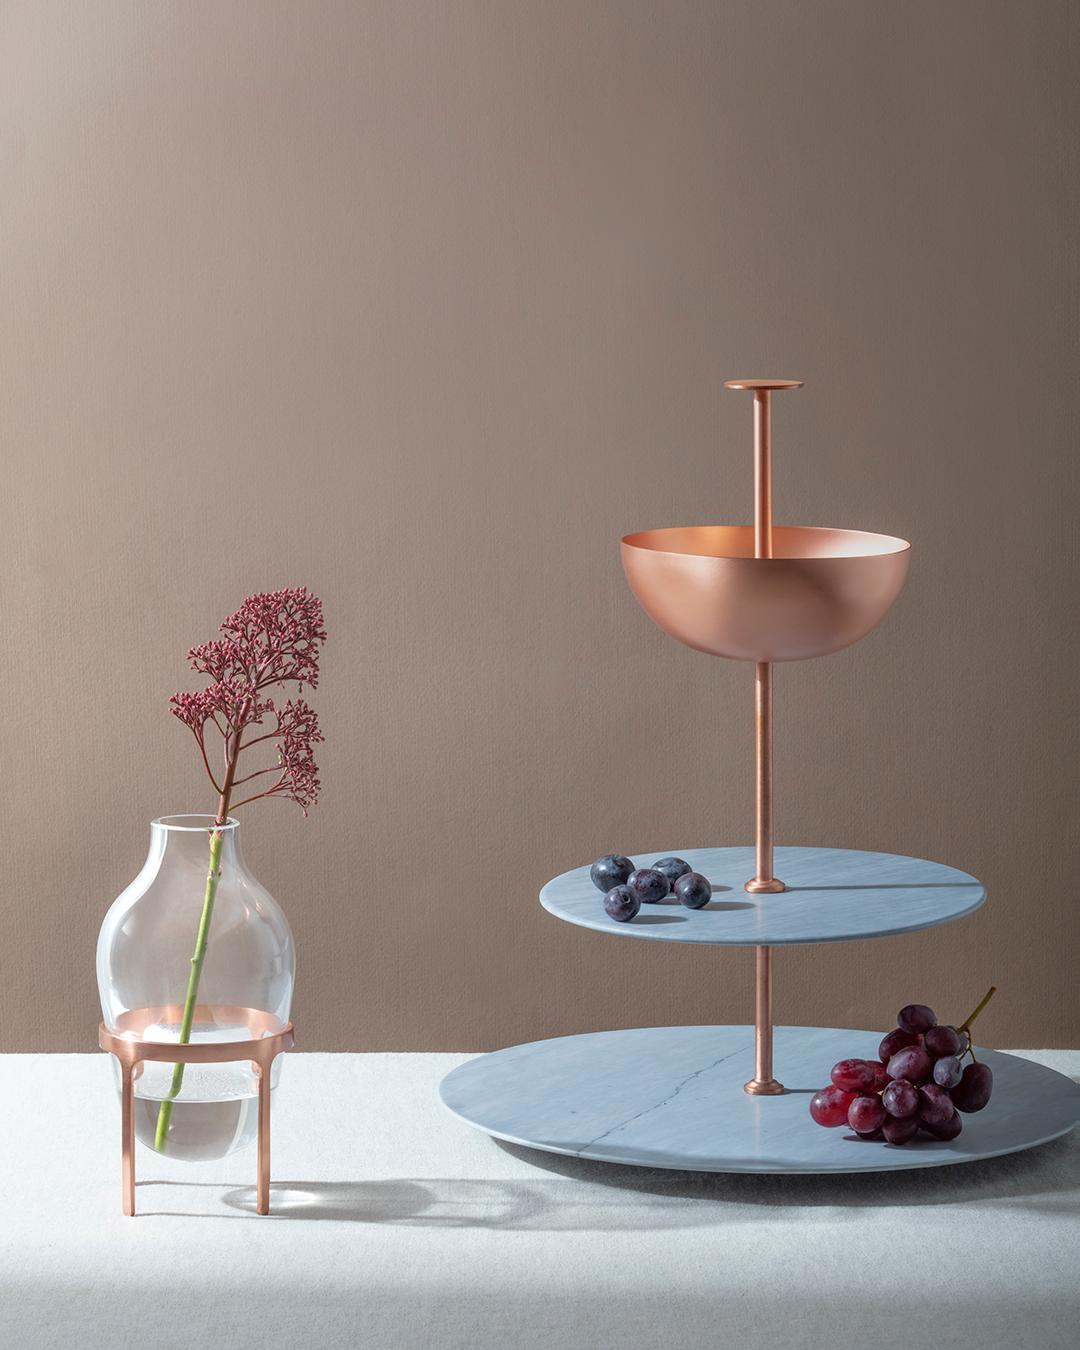 Lunar Cycle is a multi-layered stand made of two circular levels in Grigio Versilia – an Italian gray variety of marble – and a copper bowl, joined up by a thin copper elements. This Piece is part of the Lunar Landscape collection designed by Elisa